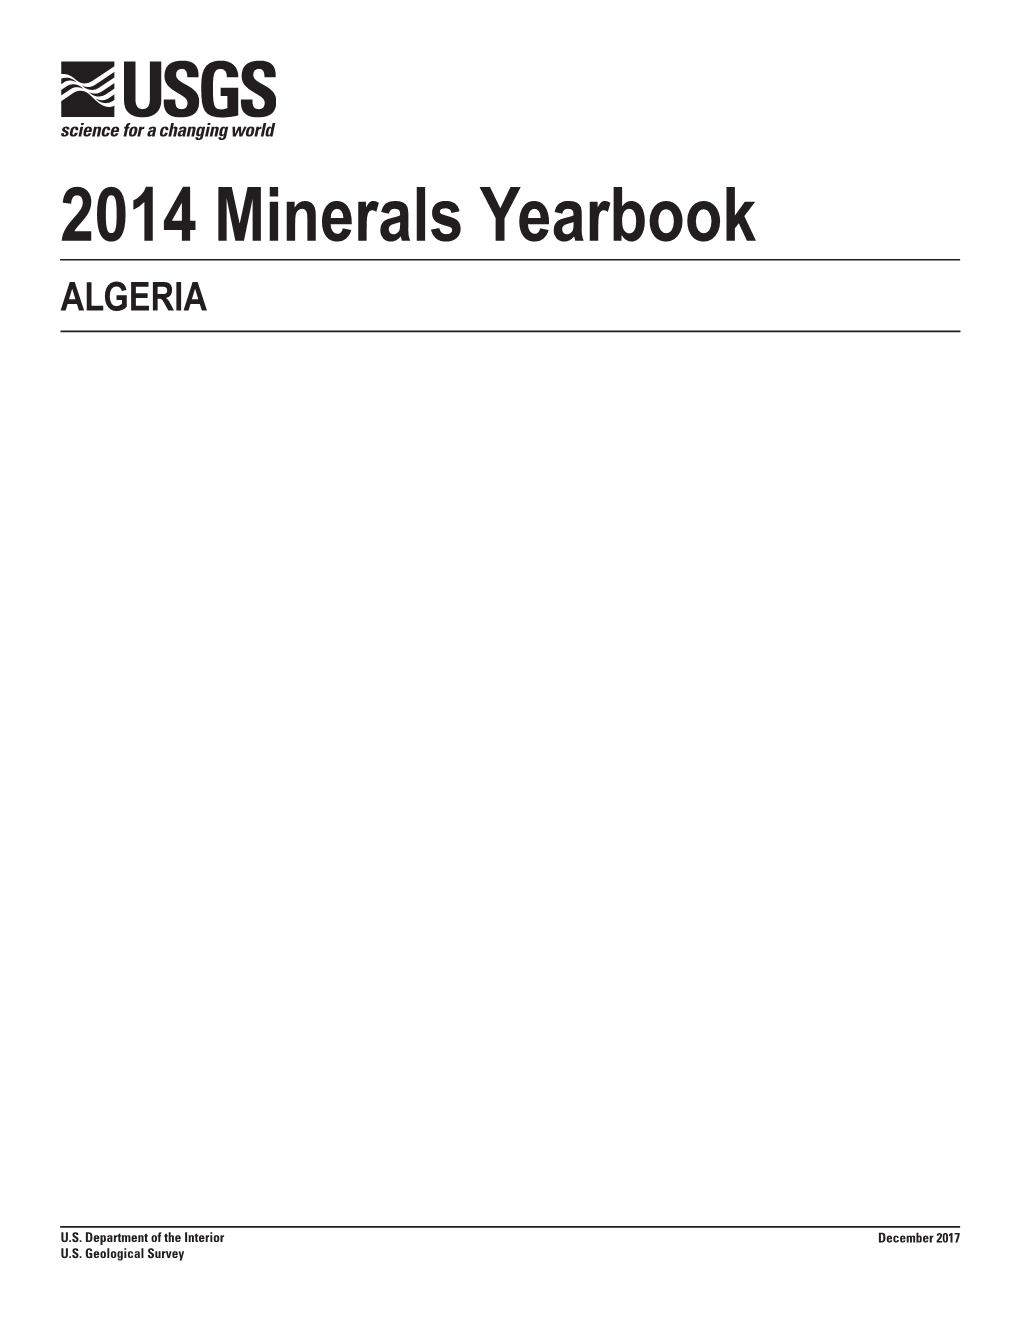 The Mineral Industry of Algeria in 2014